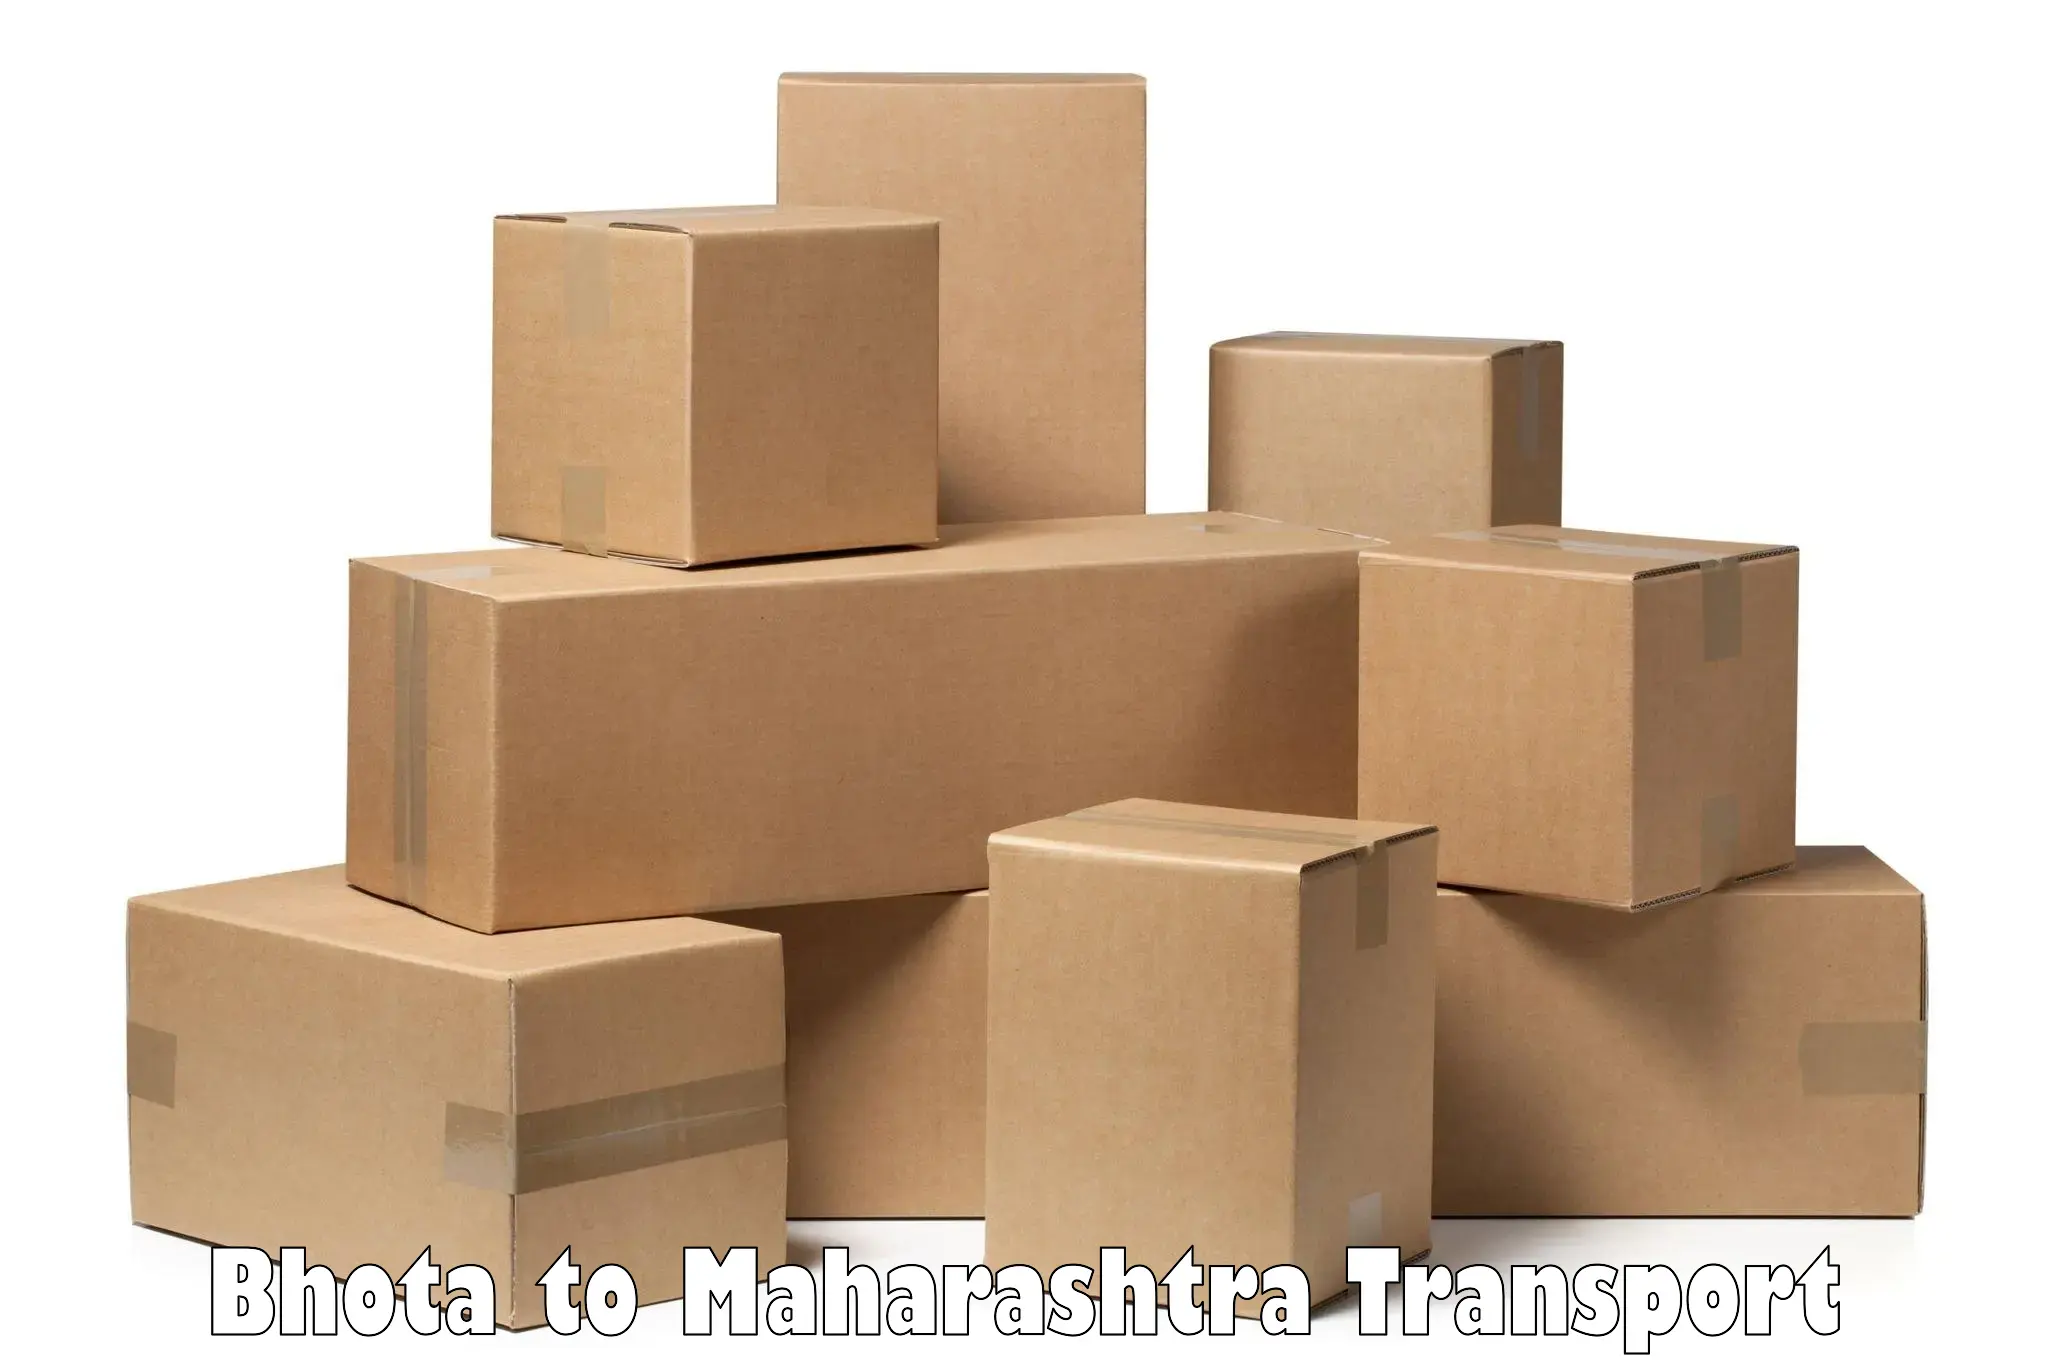 Container transport service Bhota to Sangola